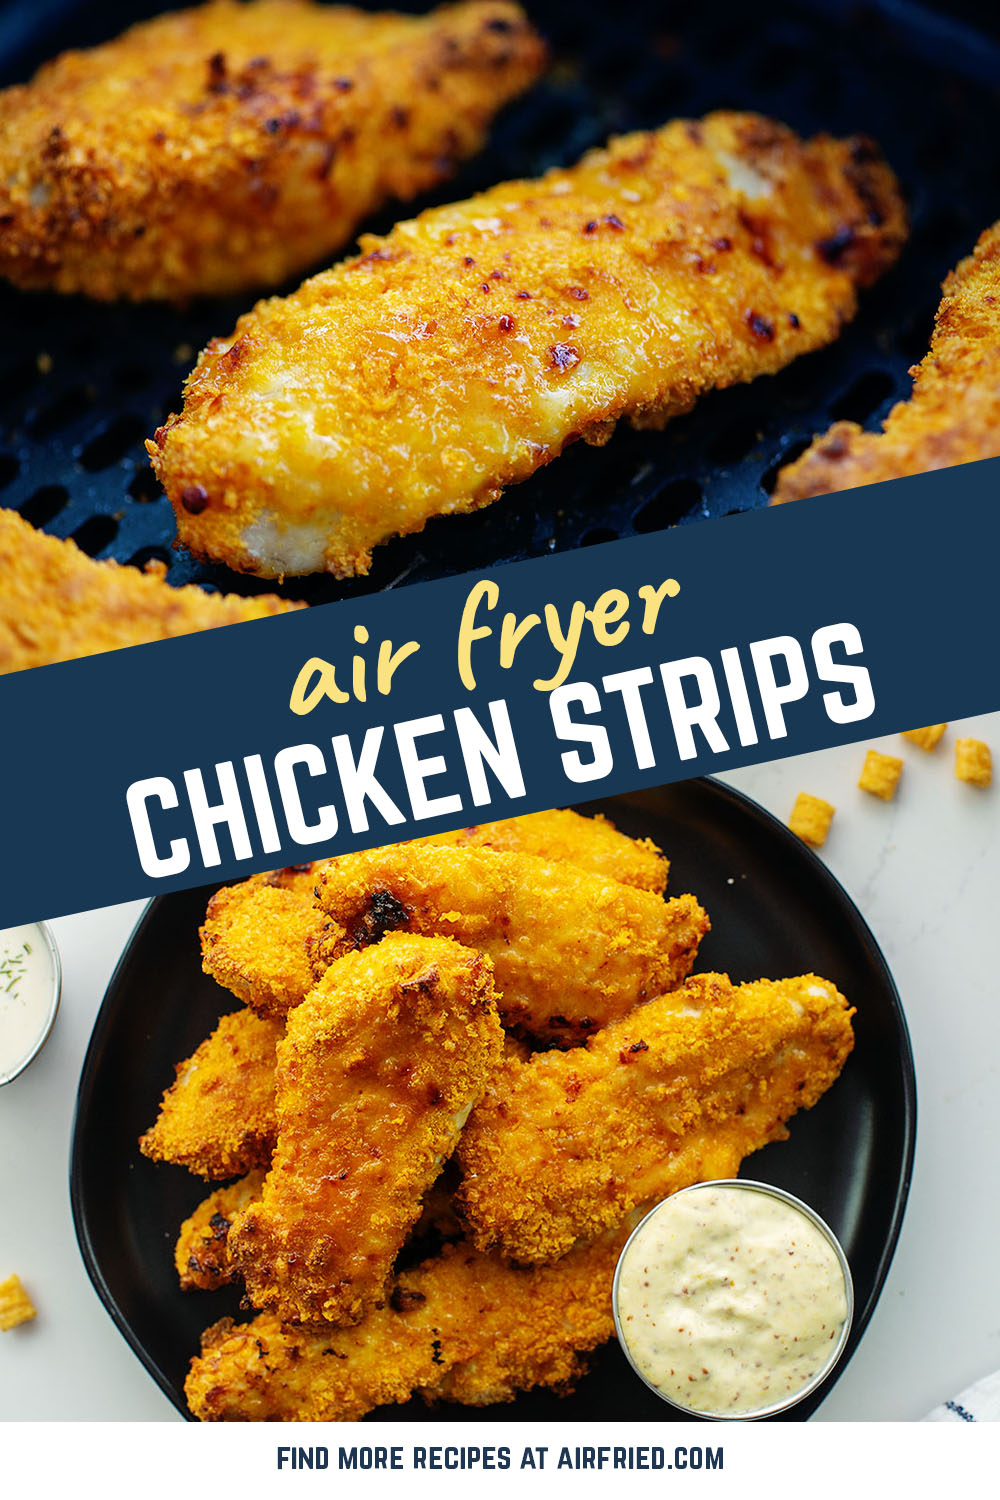 These special air fryer chicken strips are coated in captian crunch cereal for a wonderfully sweet breading!